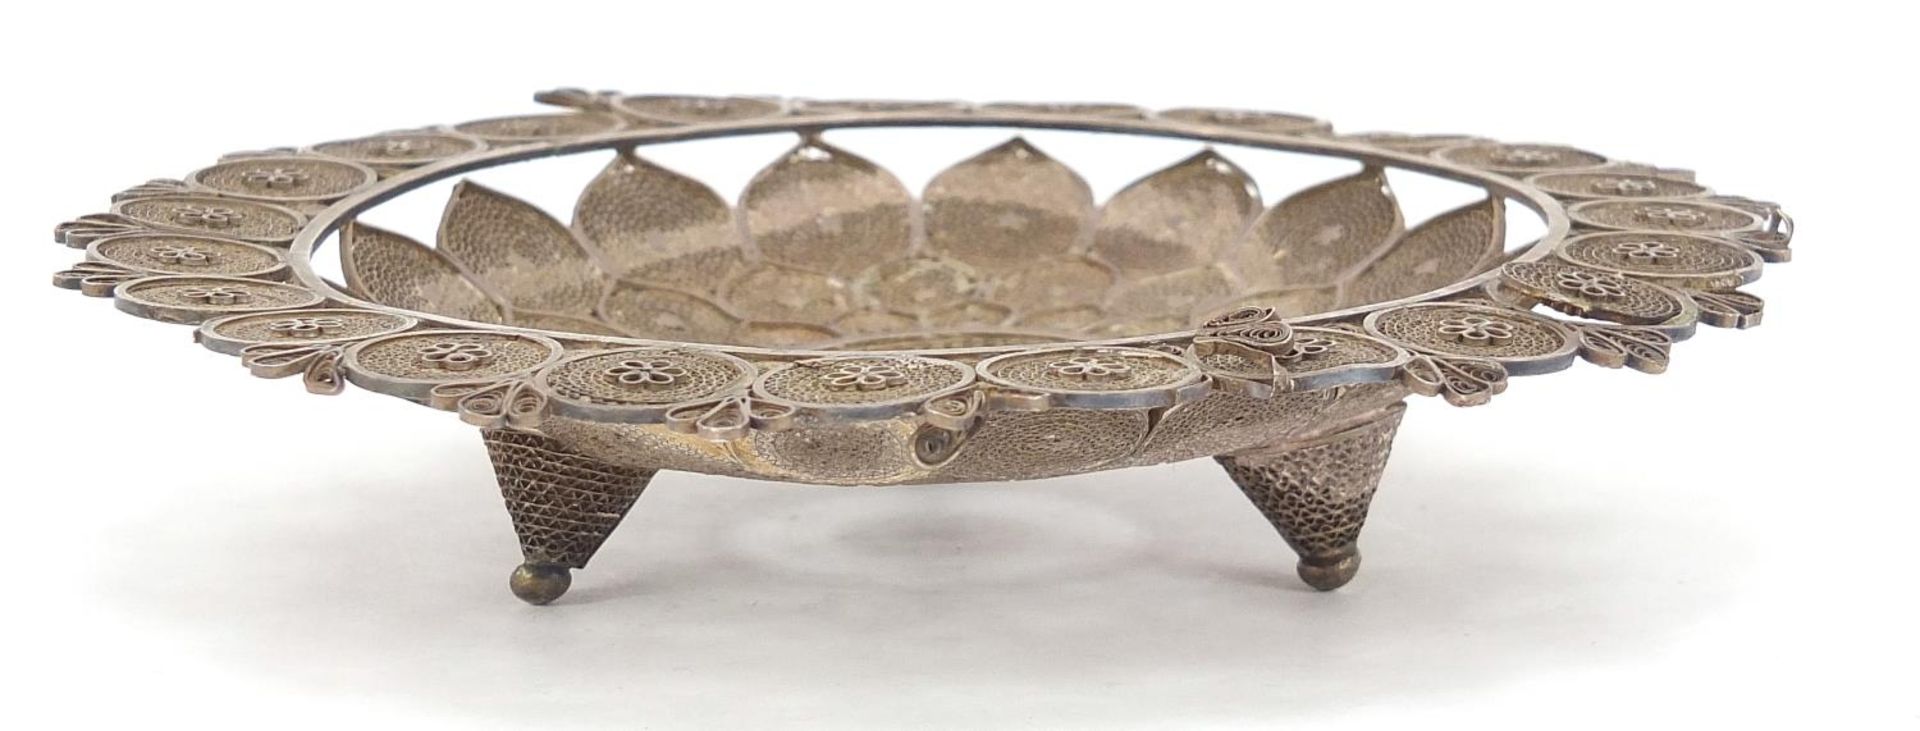 Indian silver coloured metal filigree footed dish, 18cm in diameter, 187.4g - Image 2 of 4